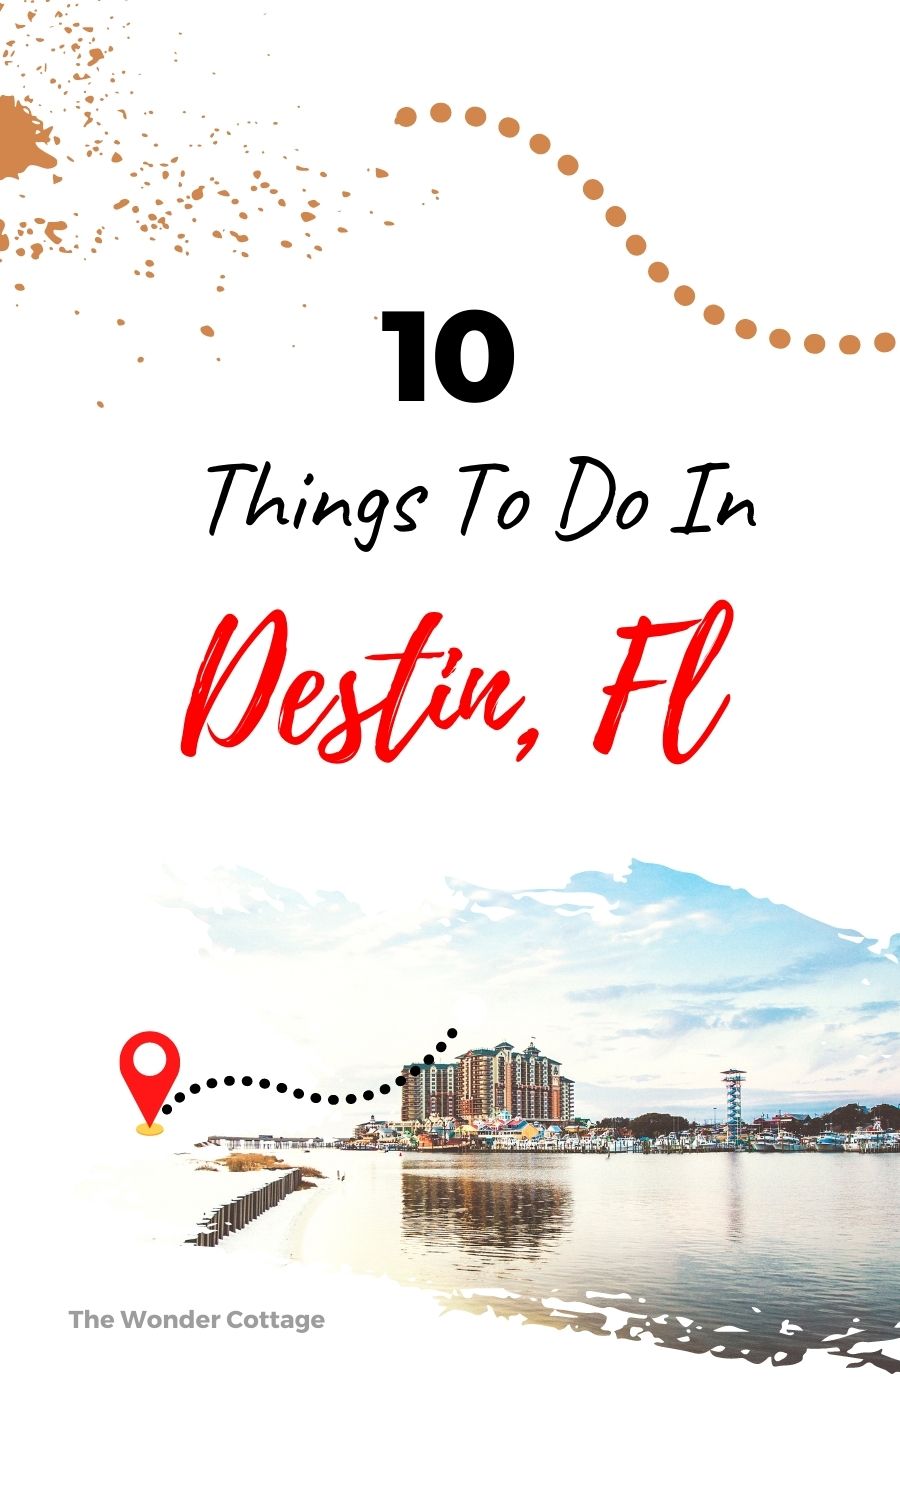 Things to do in Destin